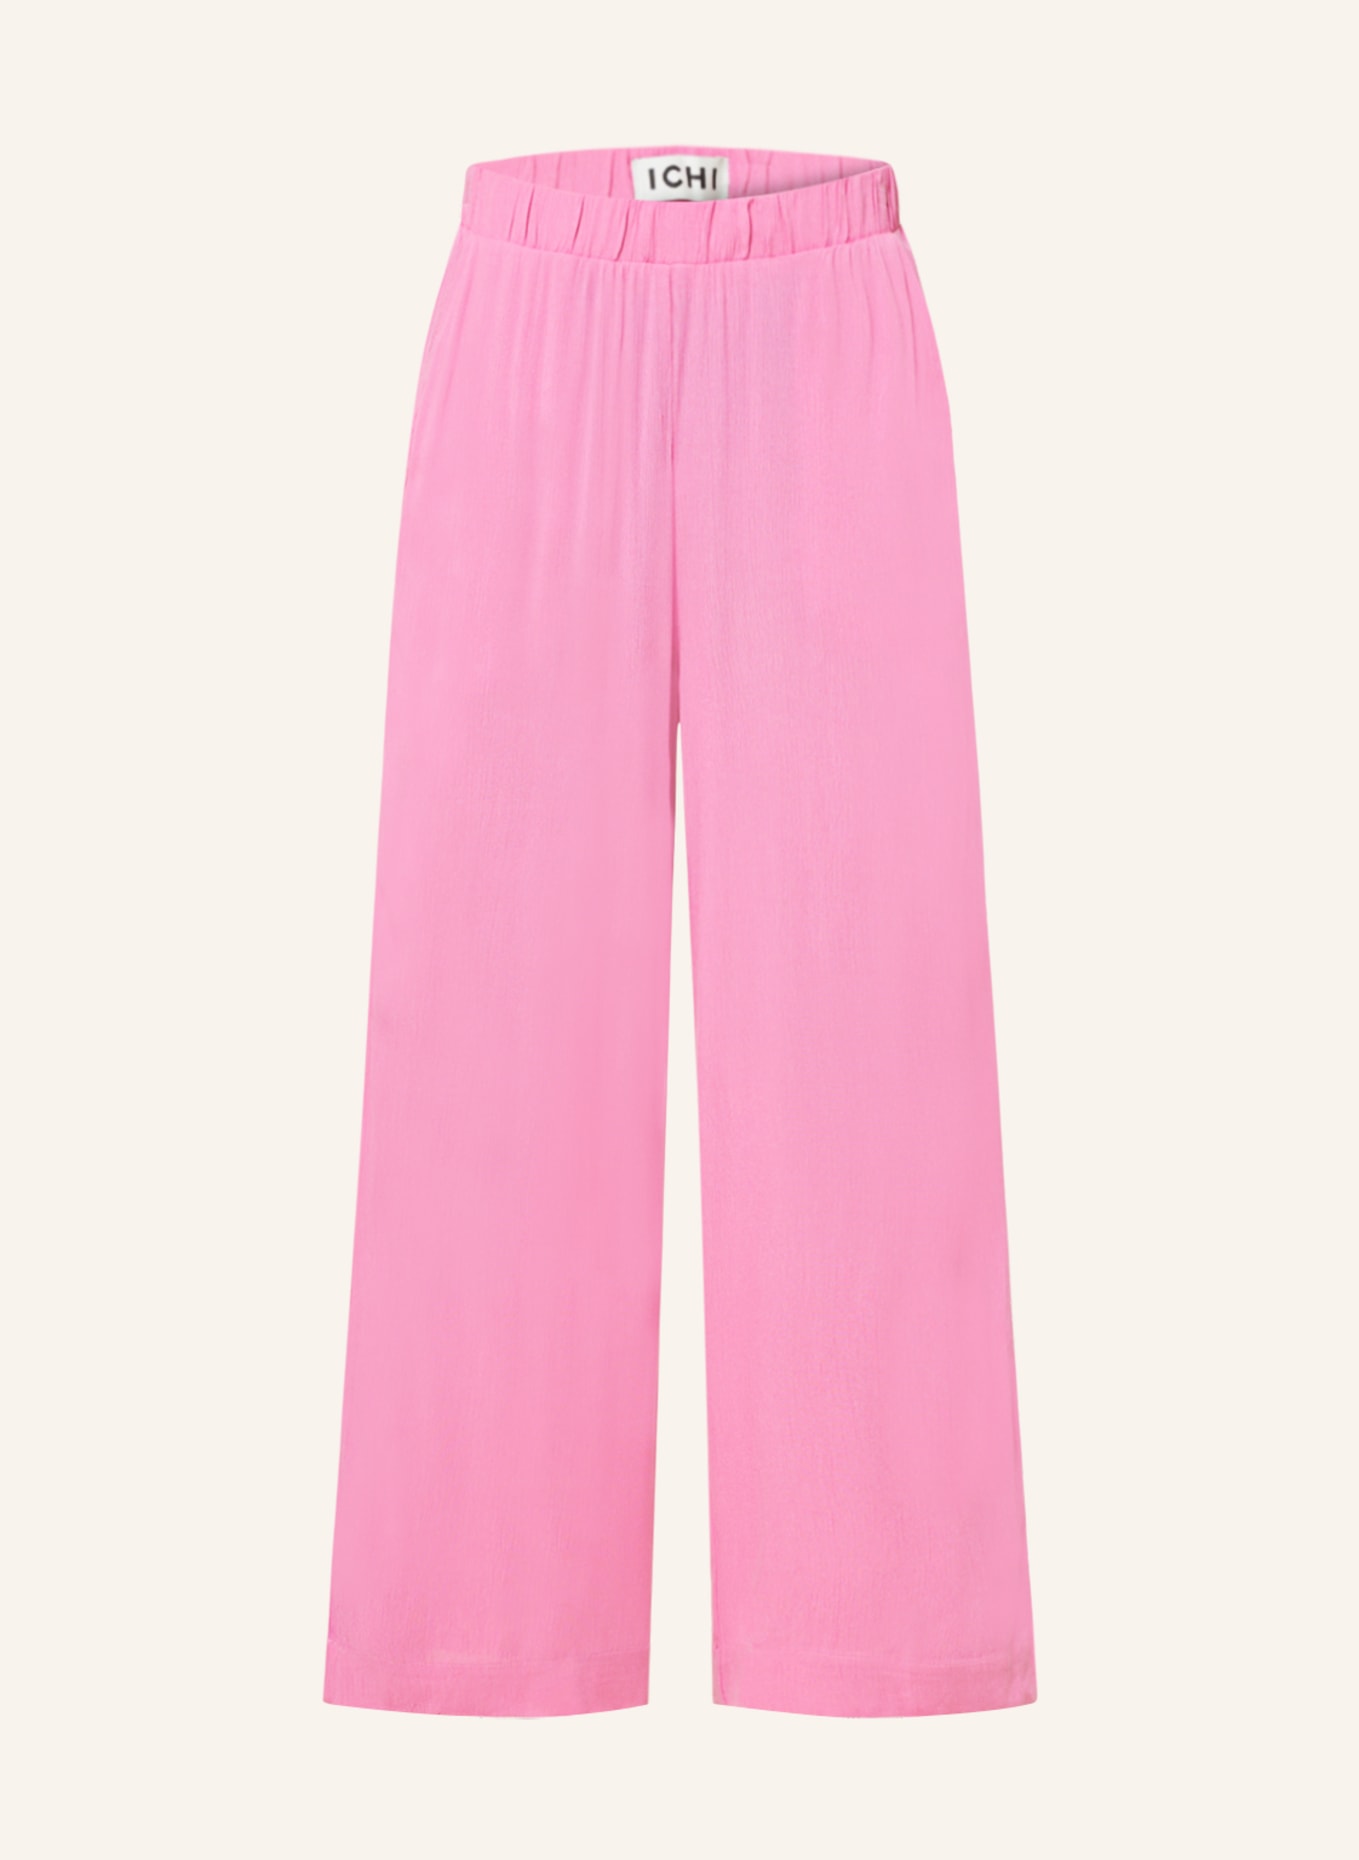 ICHI Culottes IHMARRAKECH, Color: PINK (Image 1)